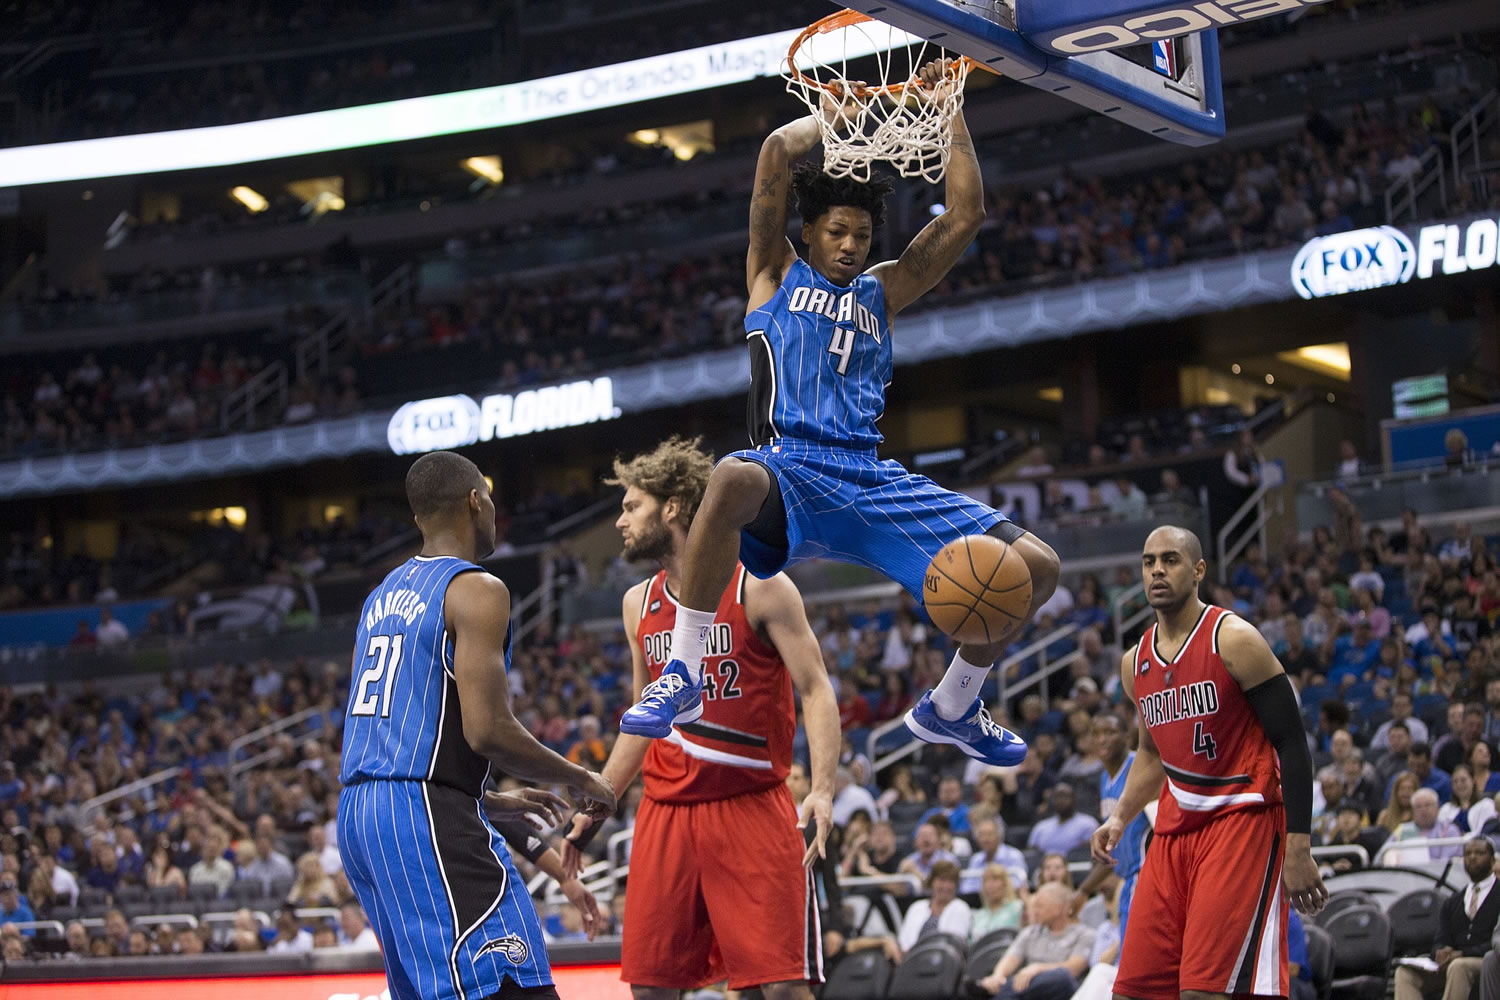 Orlando Magic guard Elfrid Payton (4) dunks on Portland Trail Blazers Robin Lopez (42) and Arron Afflalo (4) during the first half in Orlando, Fla., on Friday.